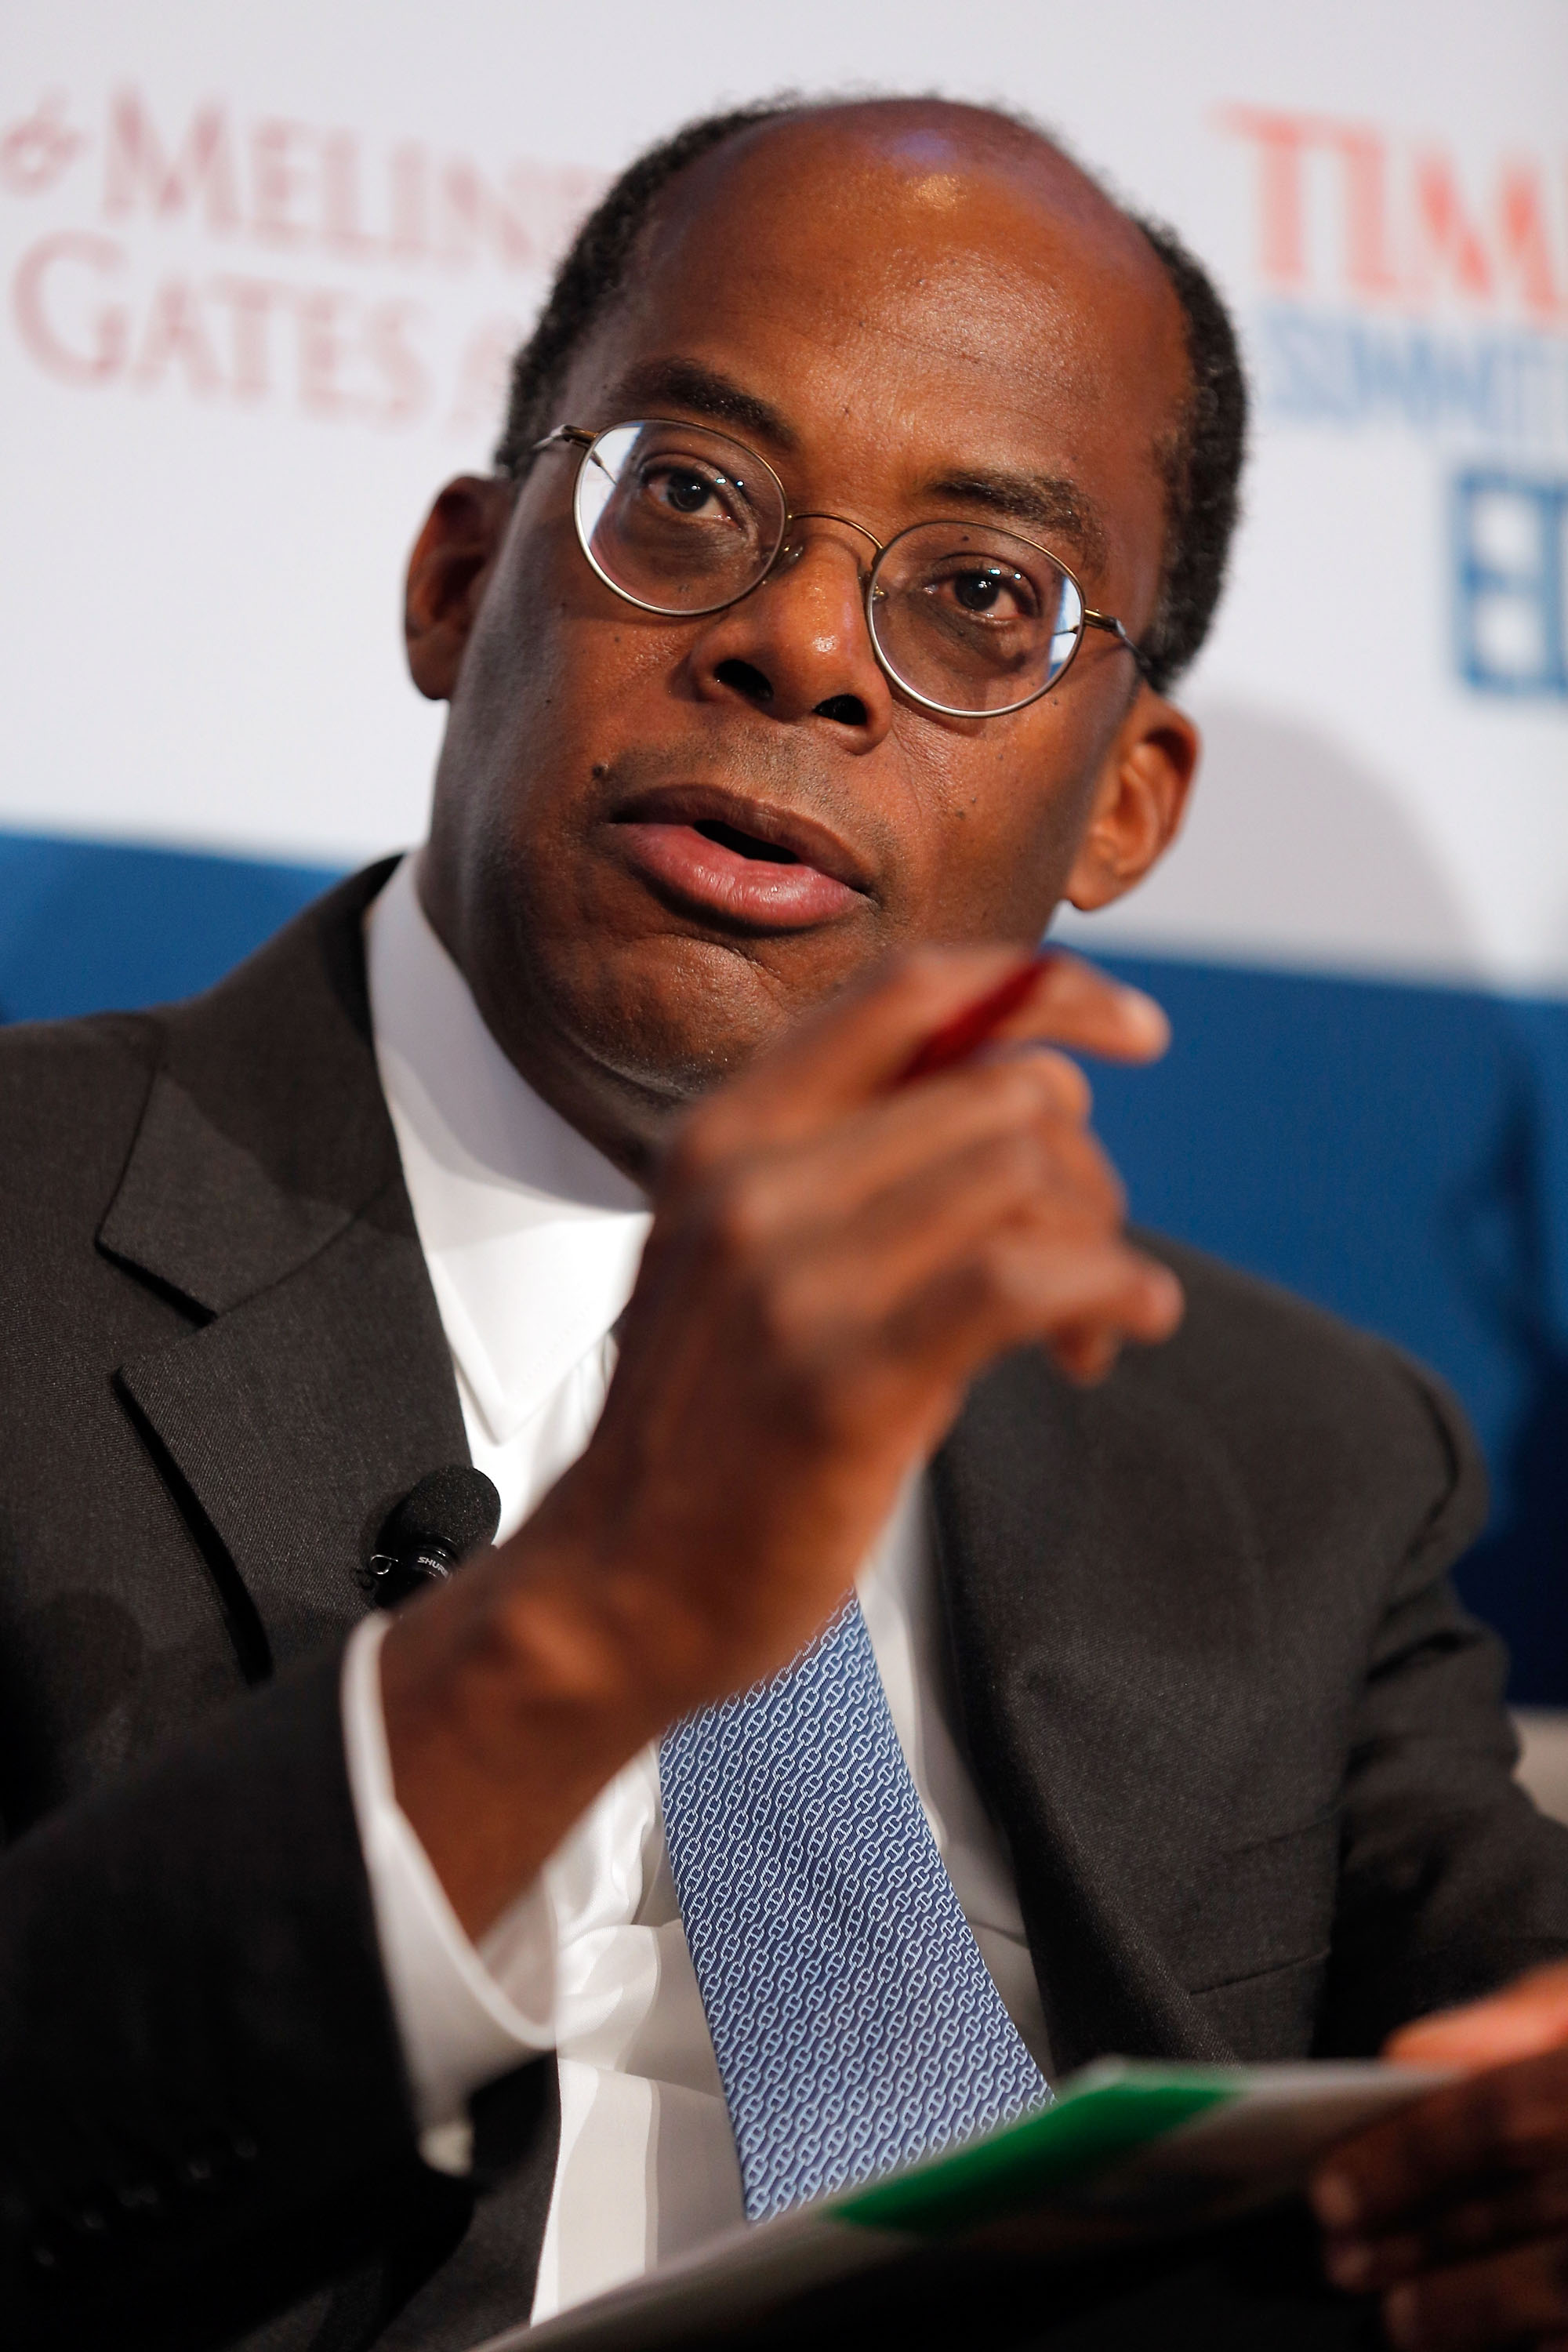 President and CEO of TIAA-CREF Roger W. Ferguson, Jr speaks during the TIME Summit On Higher Education on Oct. 18, 2012 in New York City. (Jemal Countess—Getty Images)